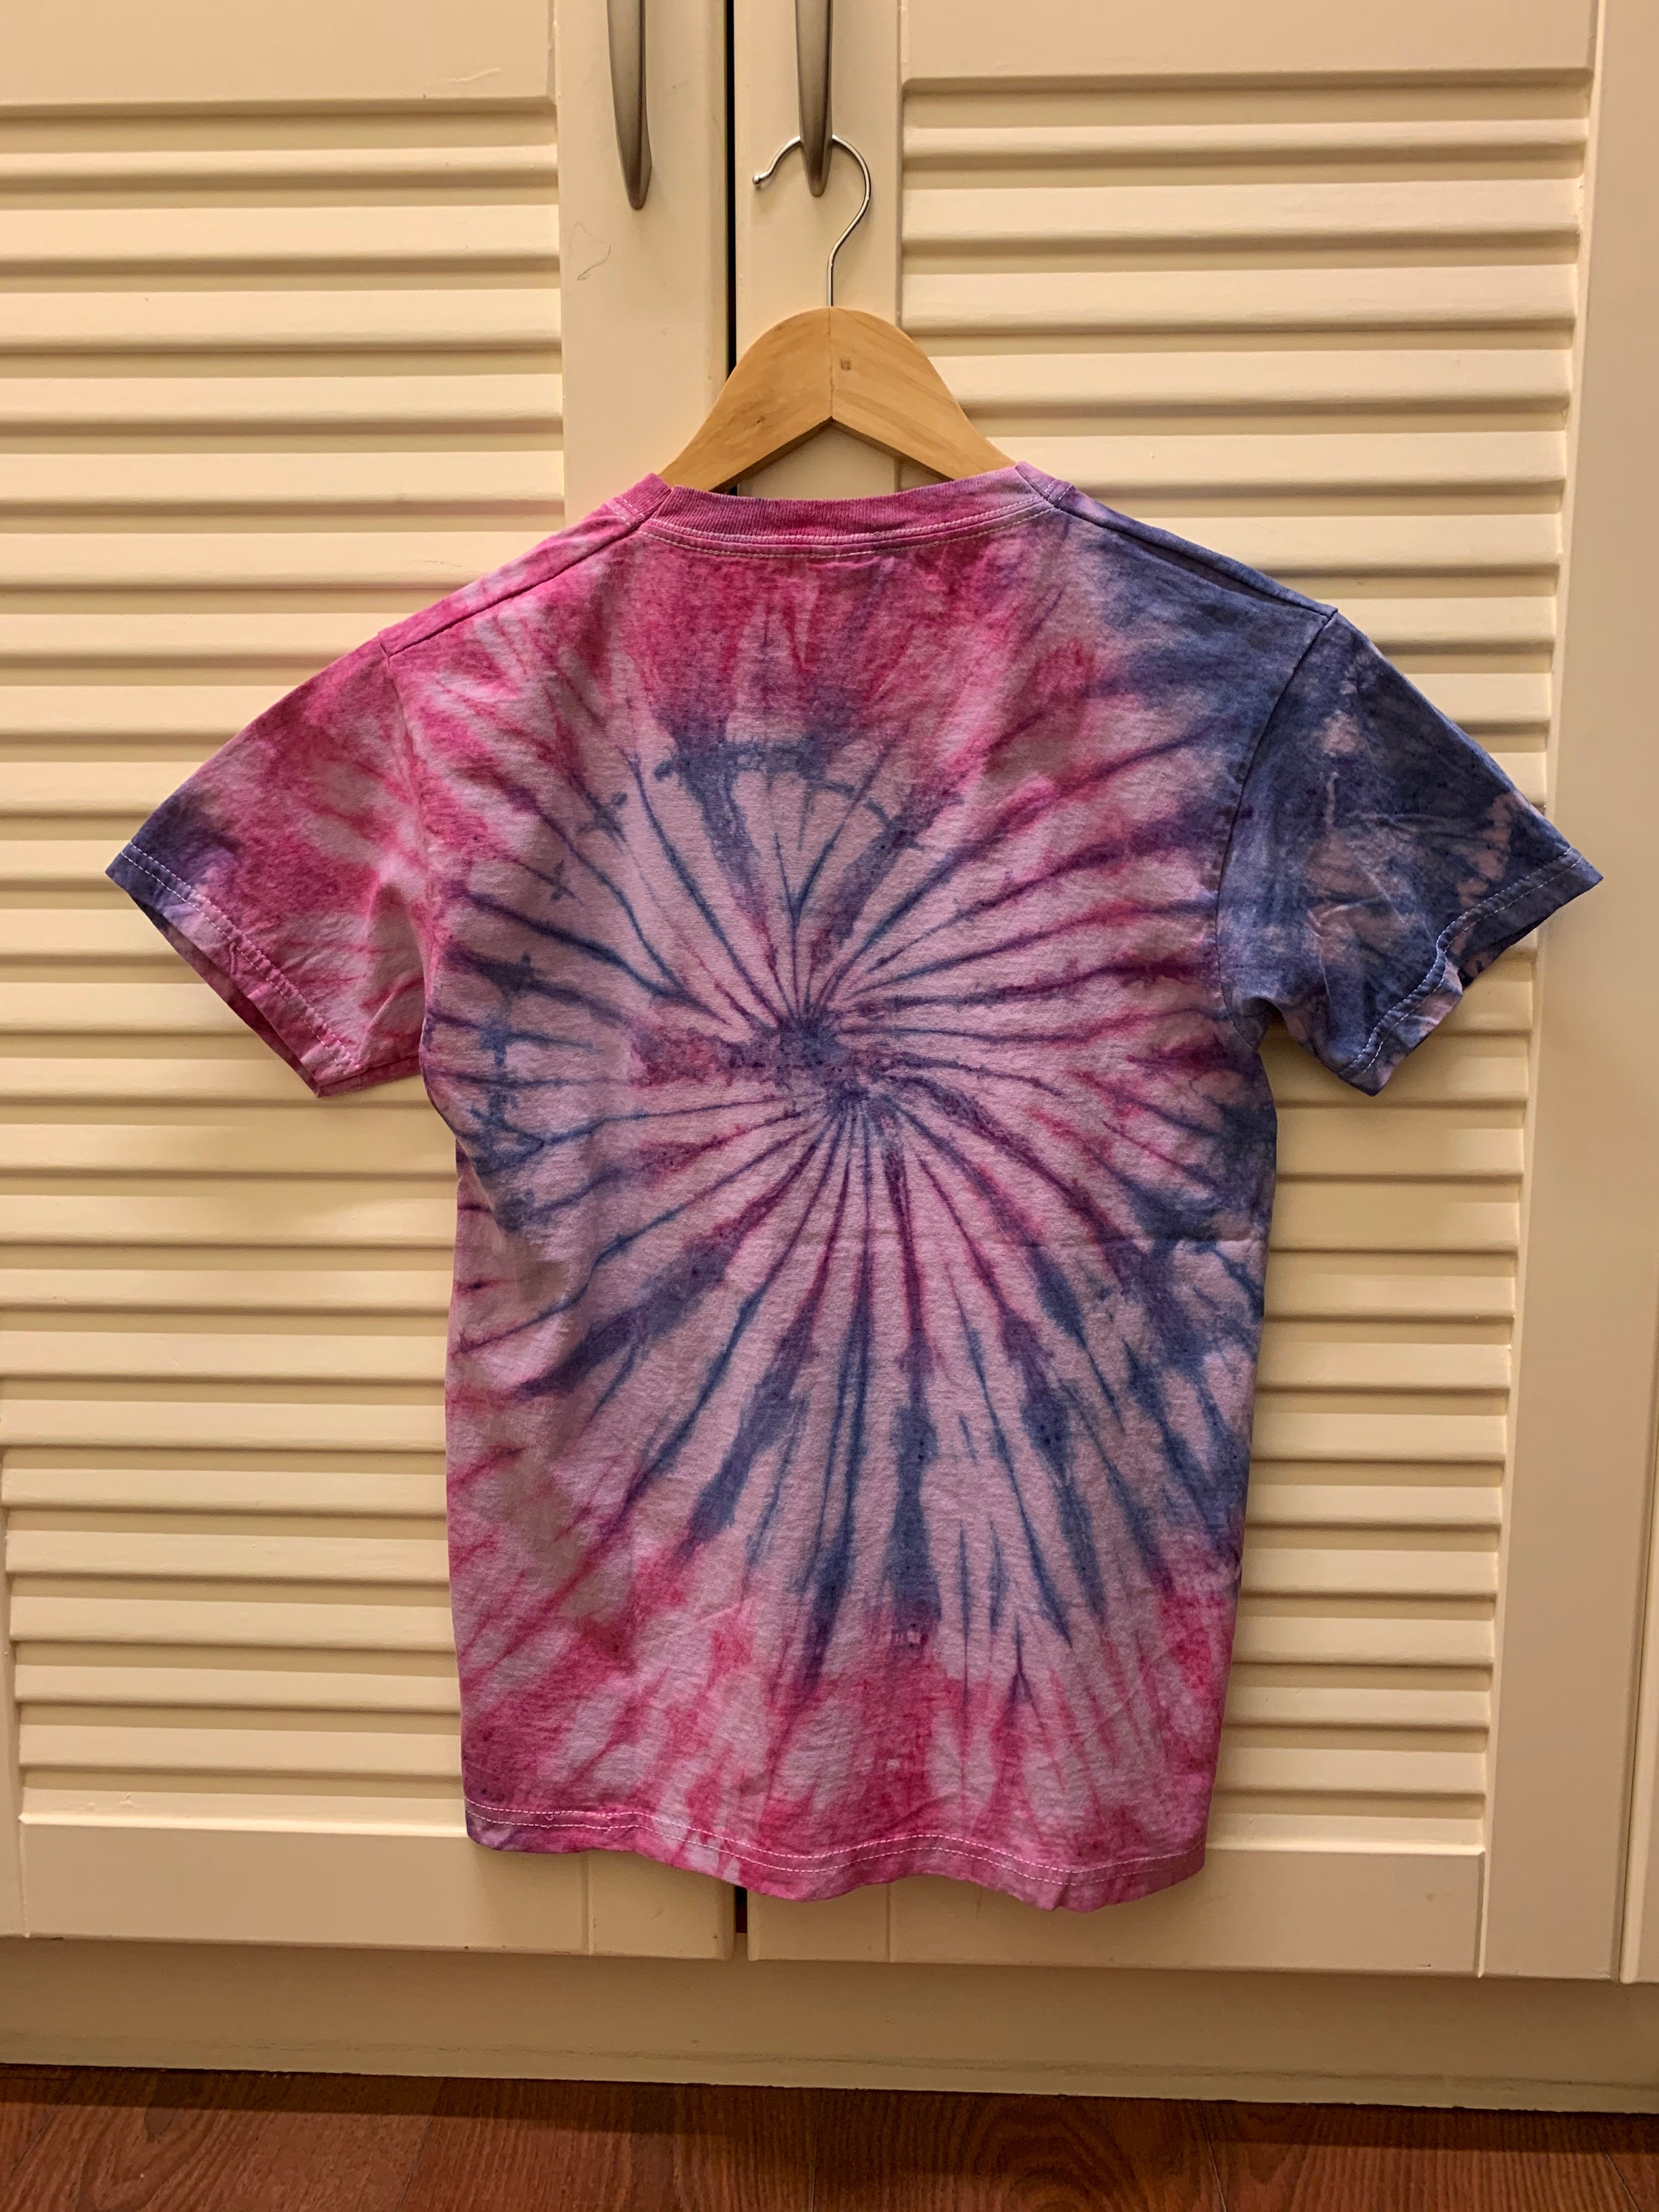 Hand Dyed Tie Dye T-Shirt Pink & Blue Spiral | Etsy